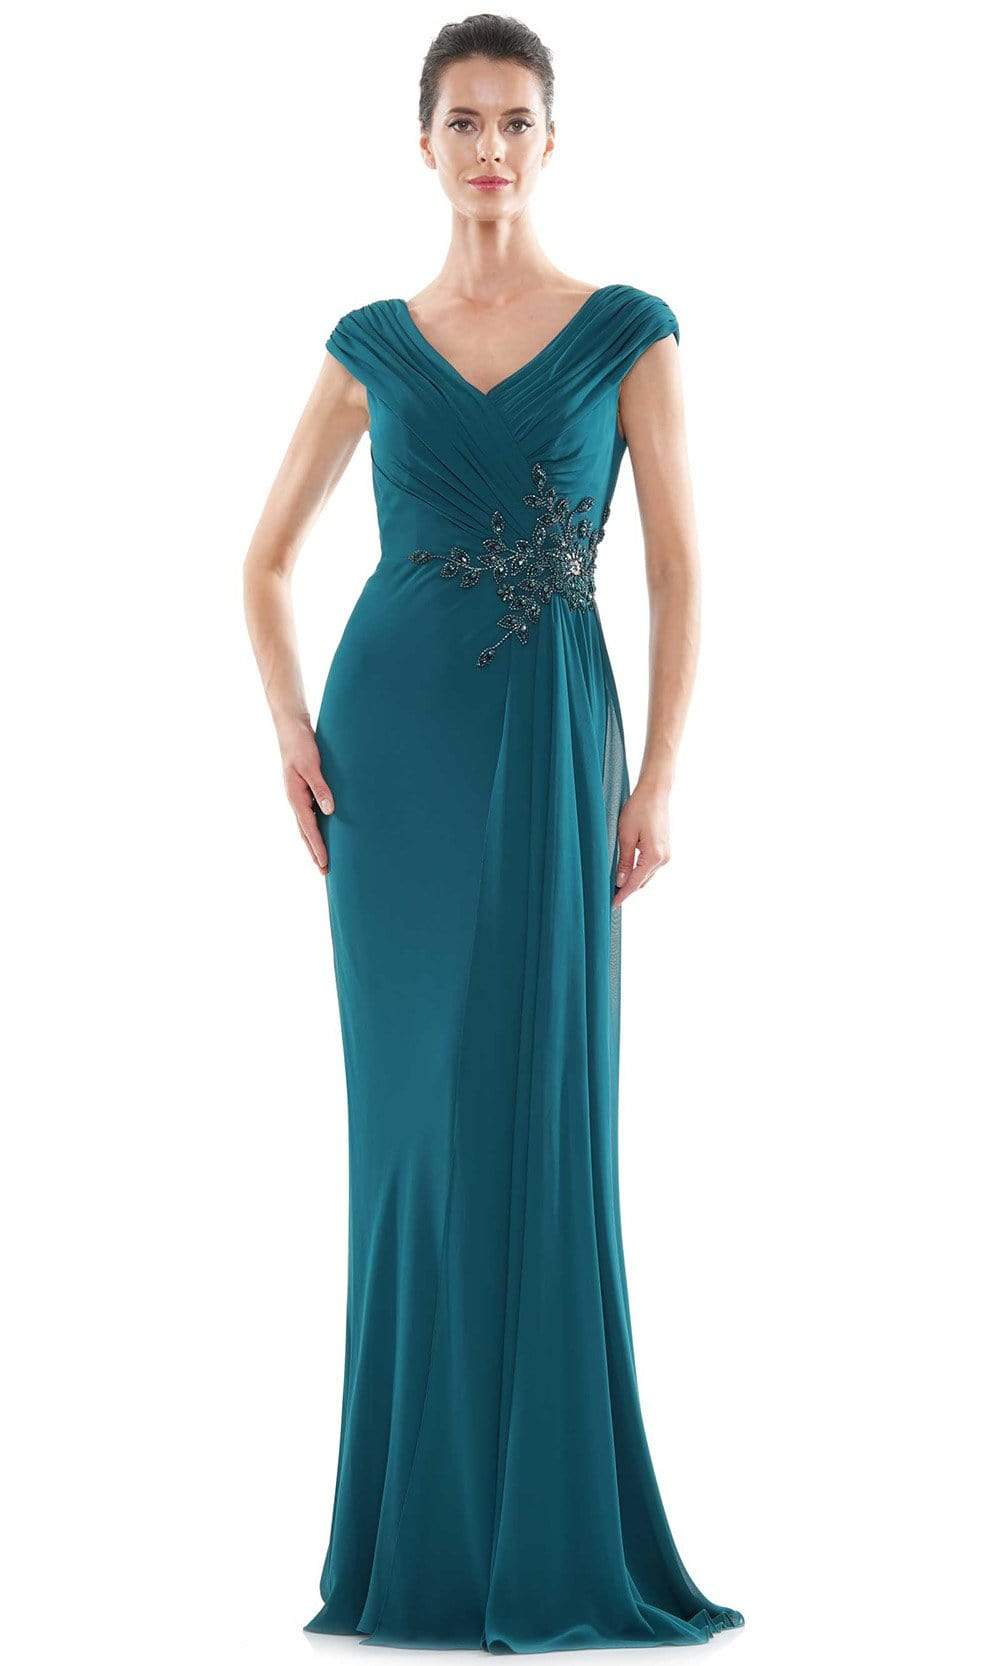 Image of Marsoni by Colors - MV1080 Cap Sleeve Foliage Beaded Sheath Gown